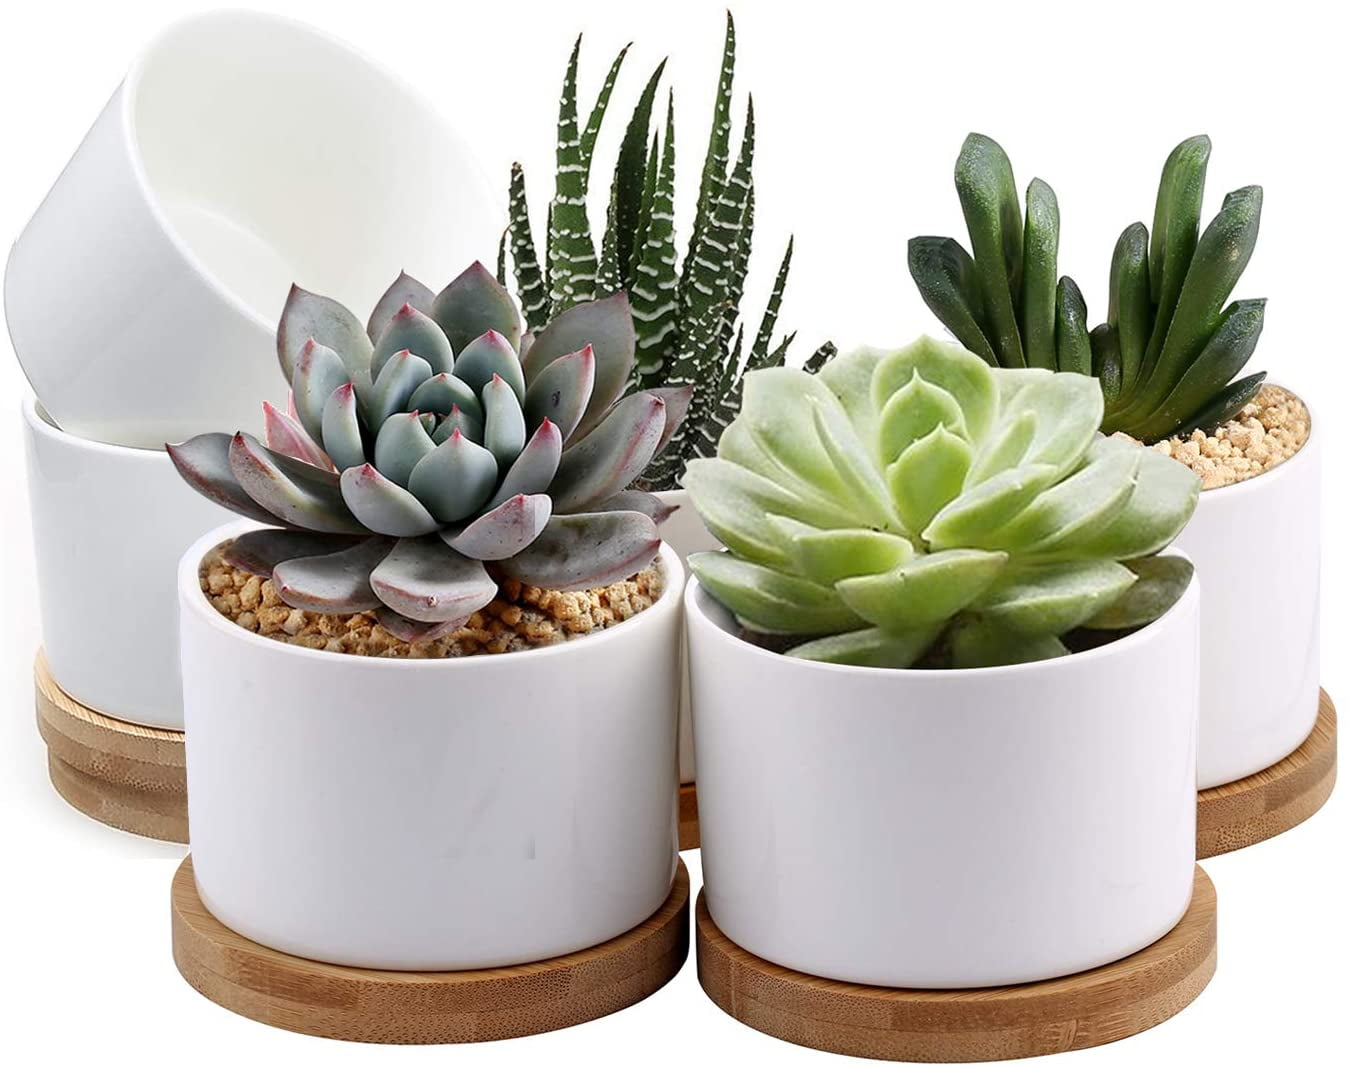 3inch Small Succulent Planters Ceramic Pots for Plants with Tray Pack of 8 